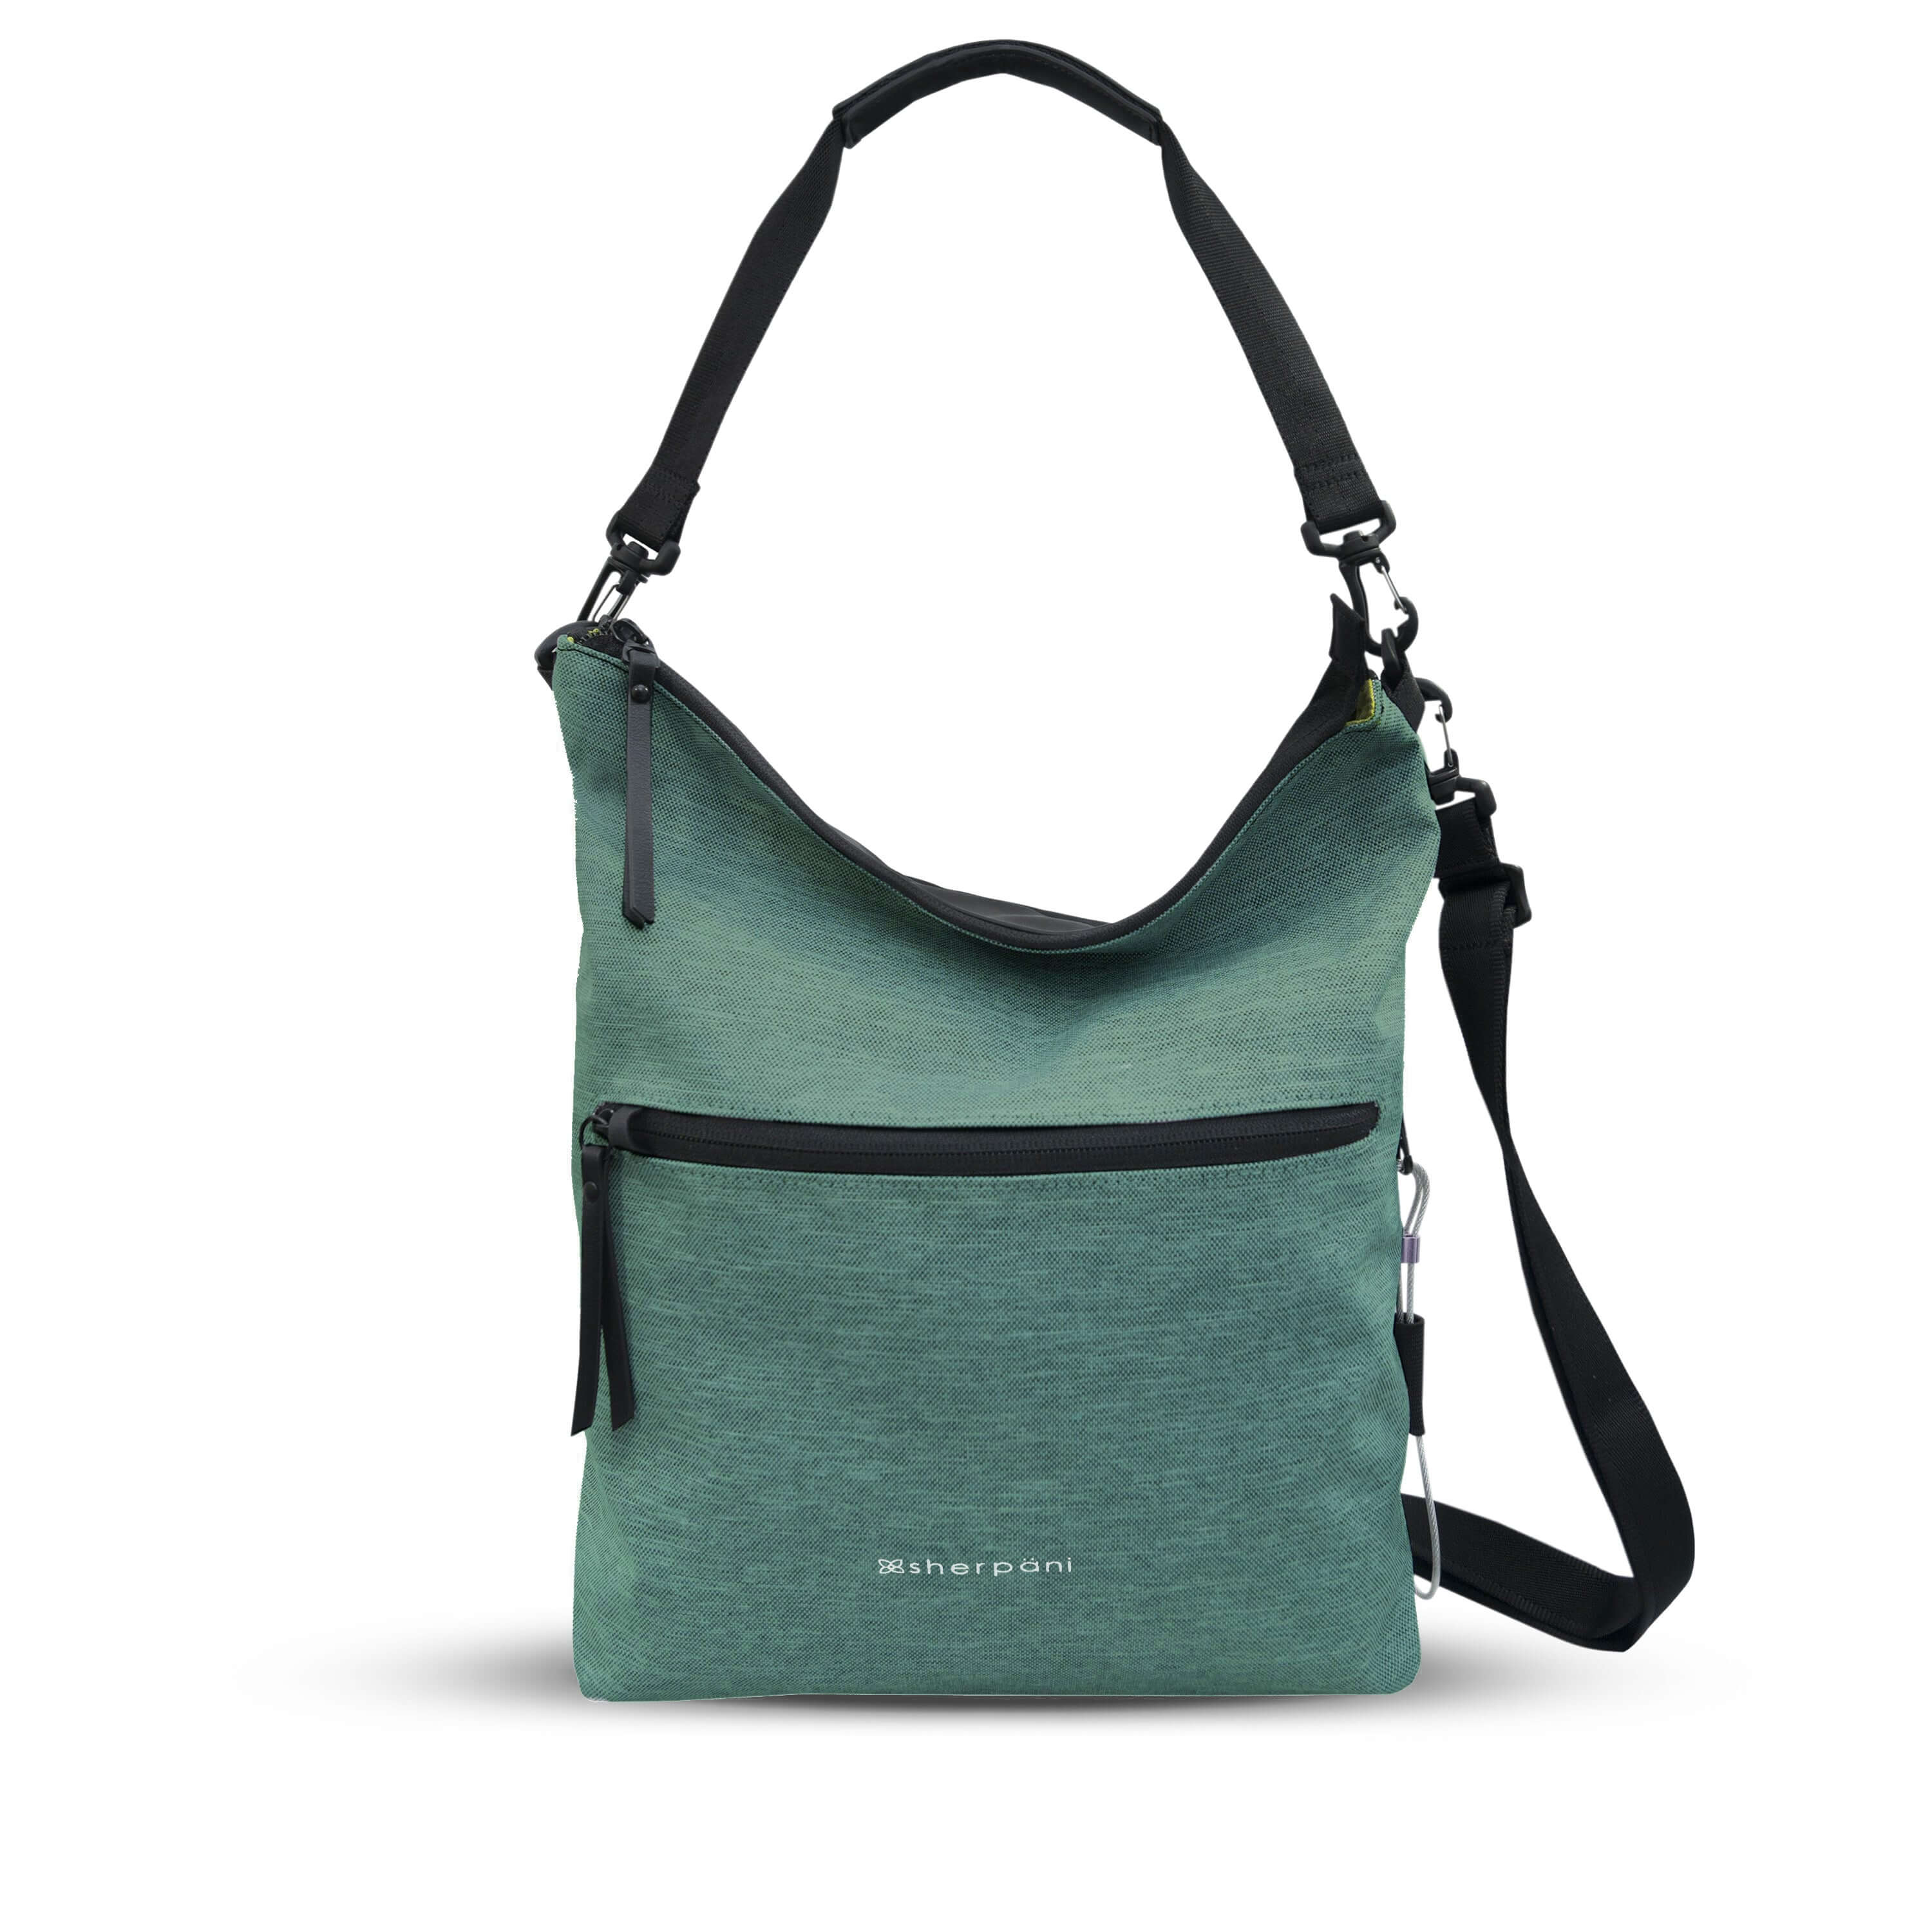 Flat front view of Sherpani&#39;s Anti-Theft bag, the Vale AT in Teal with vegan leather accents in black. The bag is standing tall with a detachable tote strap clipped to the top. There is an adjustable/detachable crossbody strap and a chair loop lock is clipped to the side of the bag. The front features an external compartment with a locking zipper.